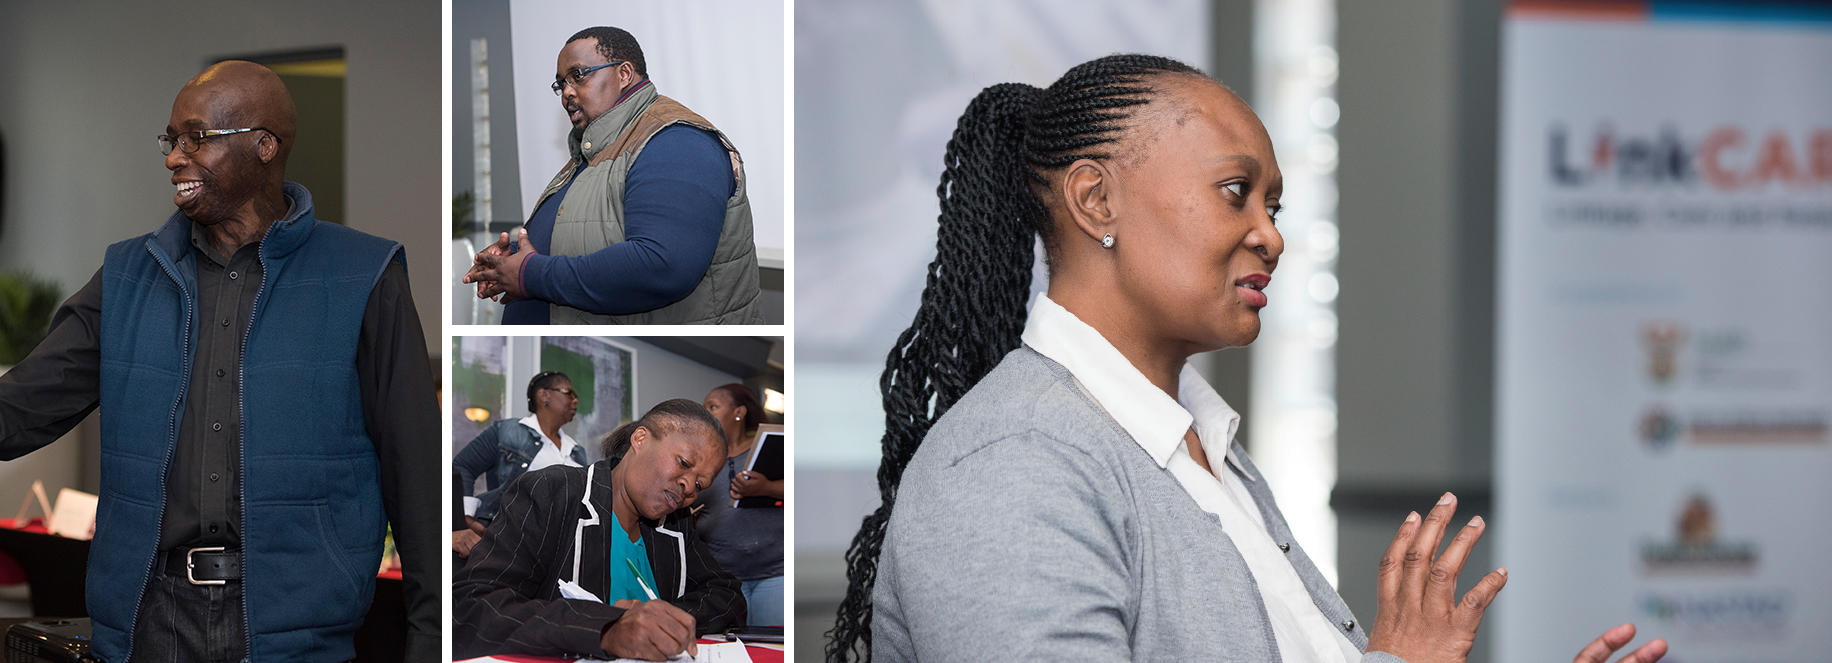 Strengthening Support Systems for South Africans Affected by HIV/AIDS